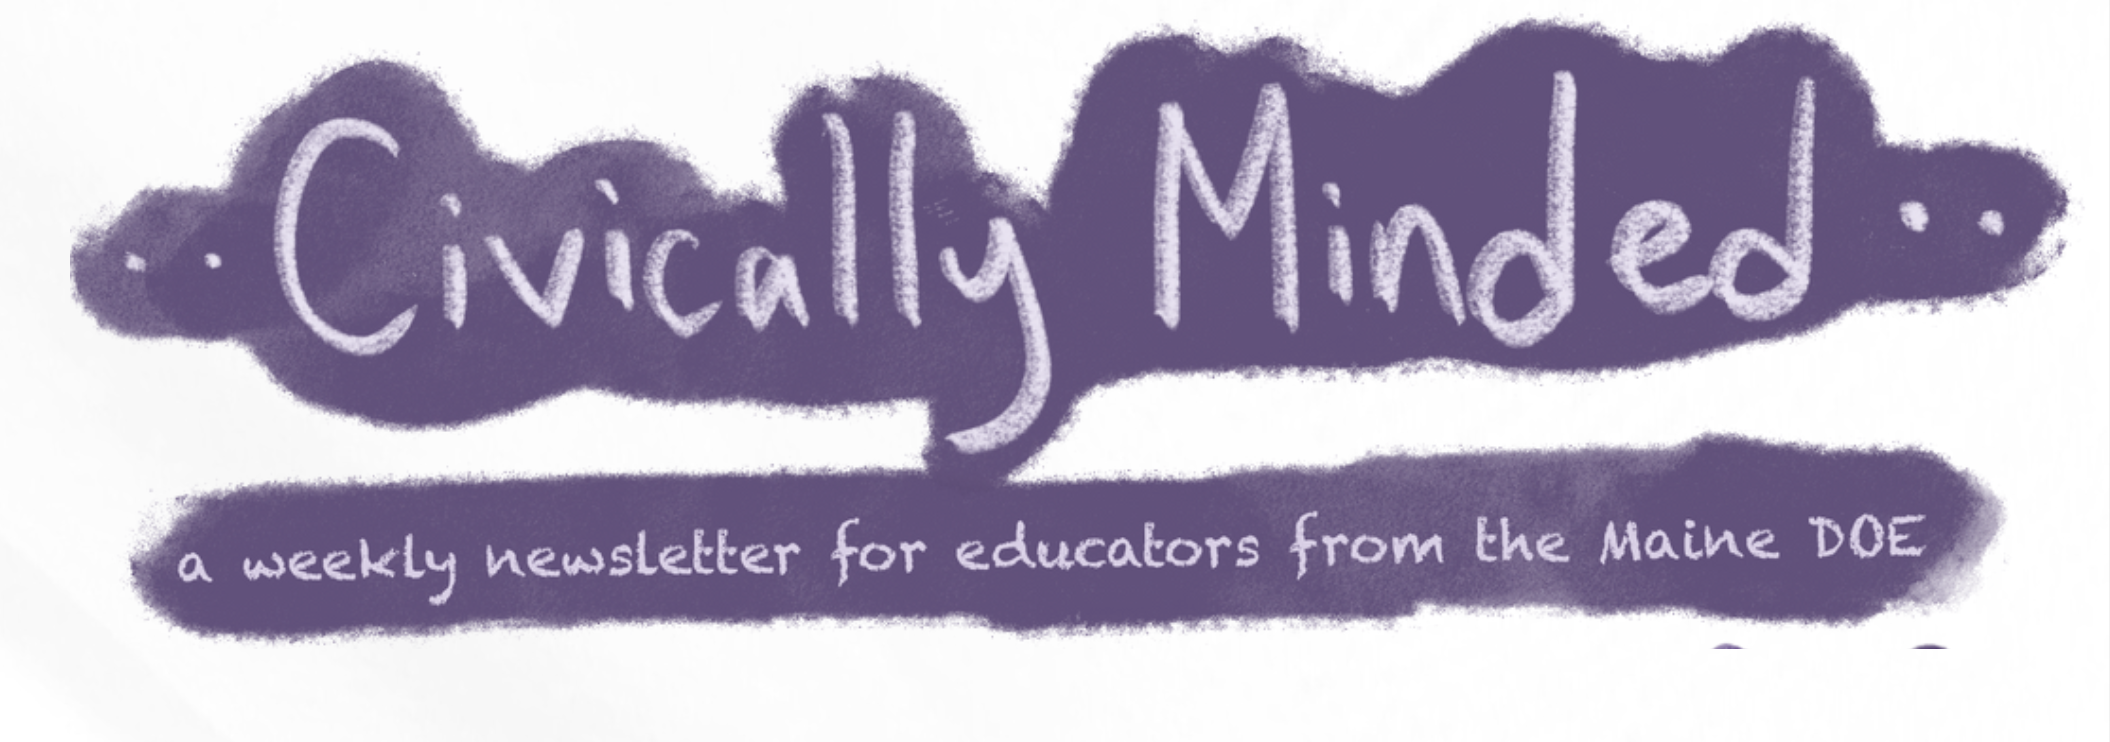 Header for newsletter that reads "Civically Minded: a weekly newsletter for educators from the Maine DOE"